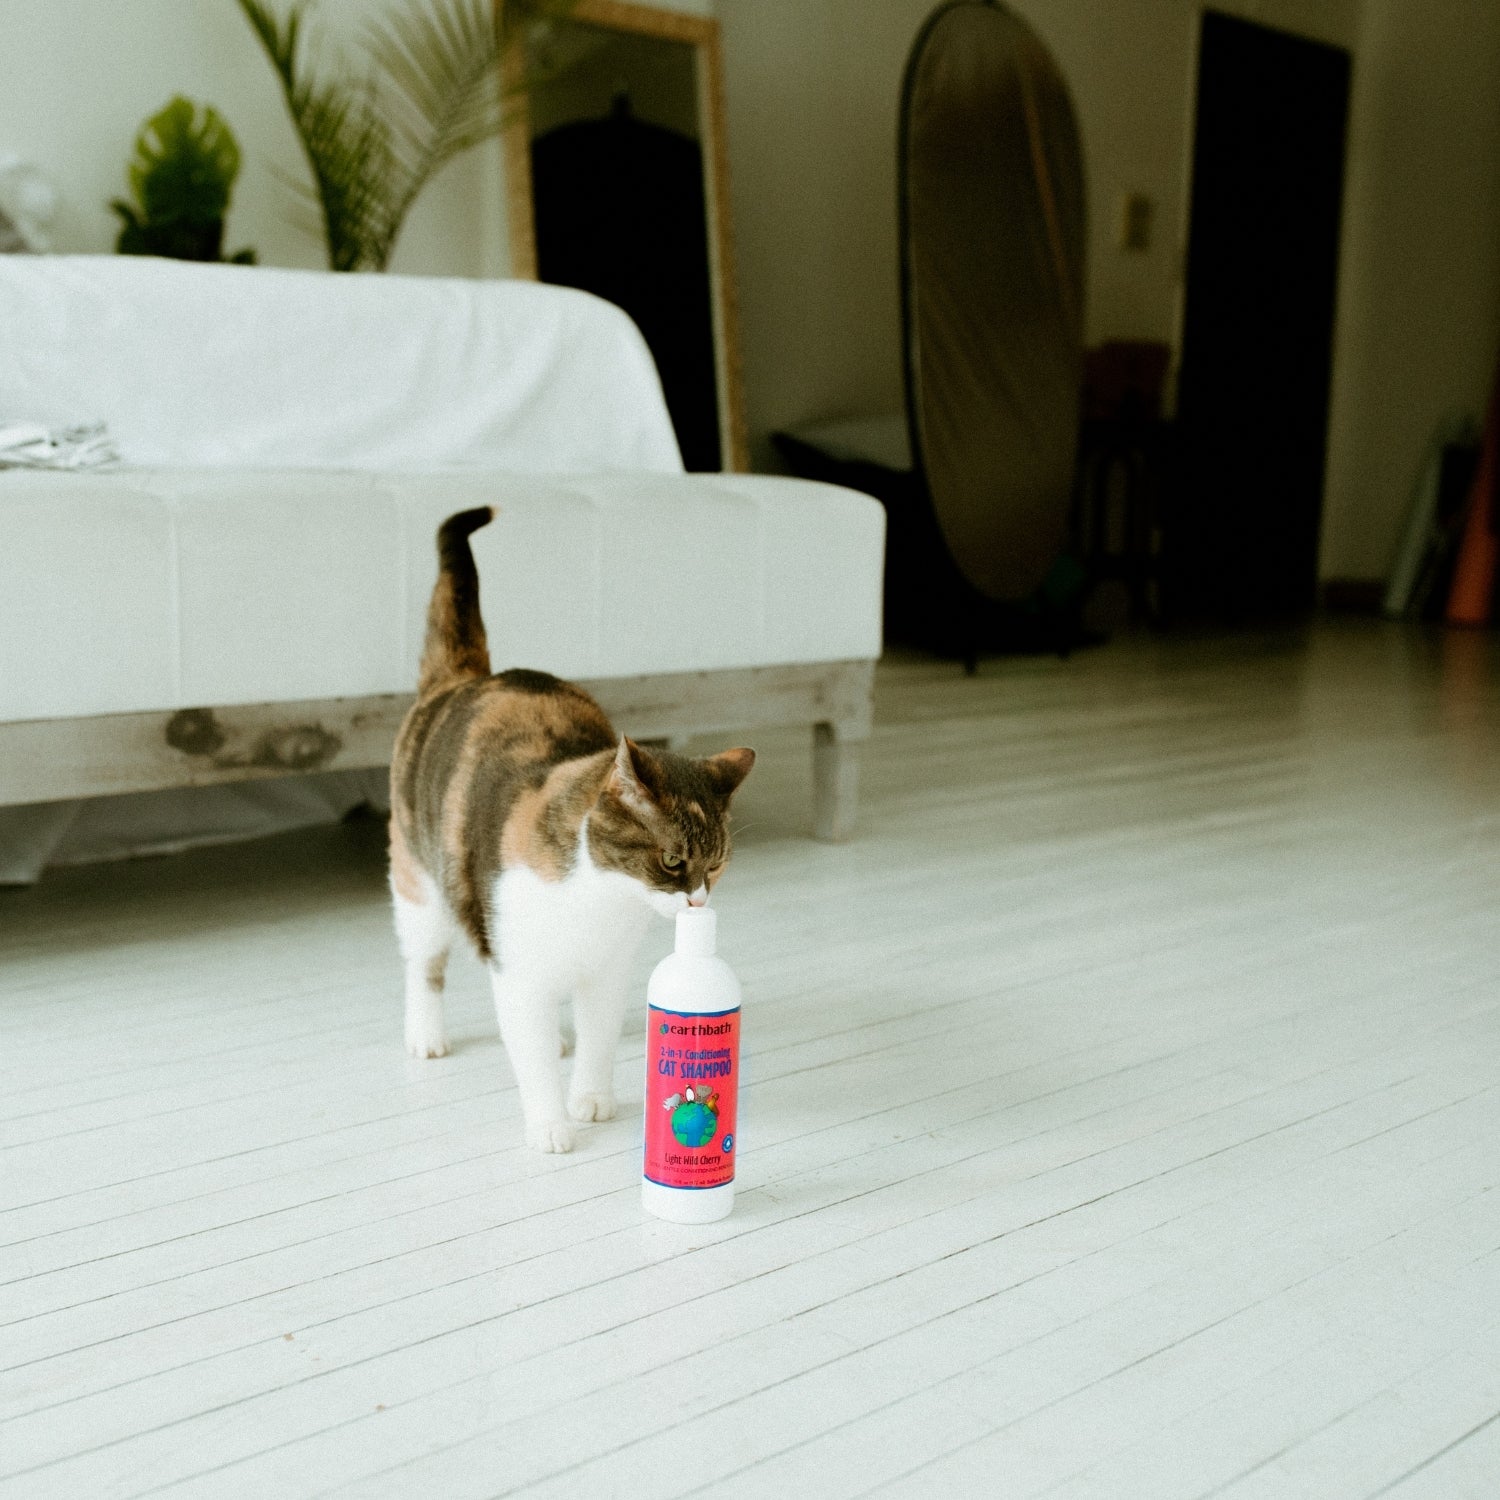 2-in-1 Conditioning Cat Shampoo